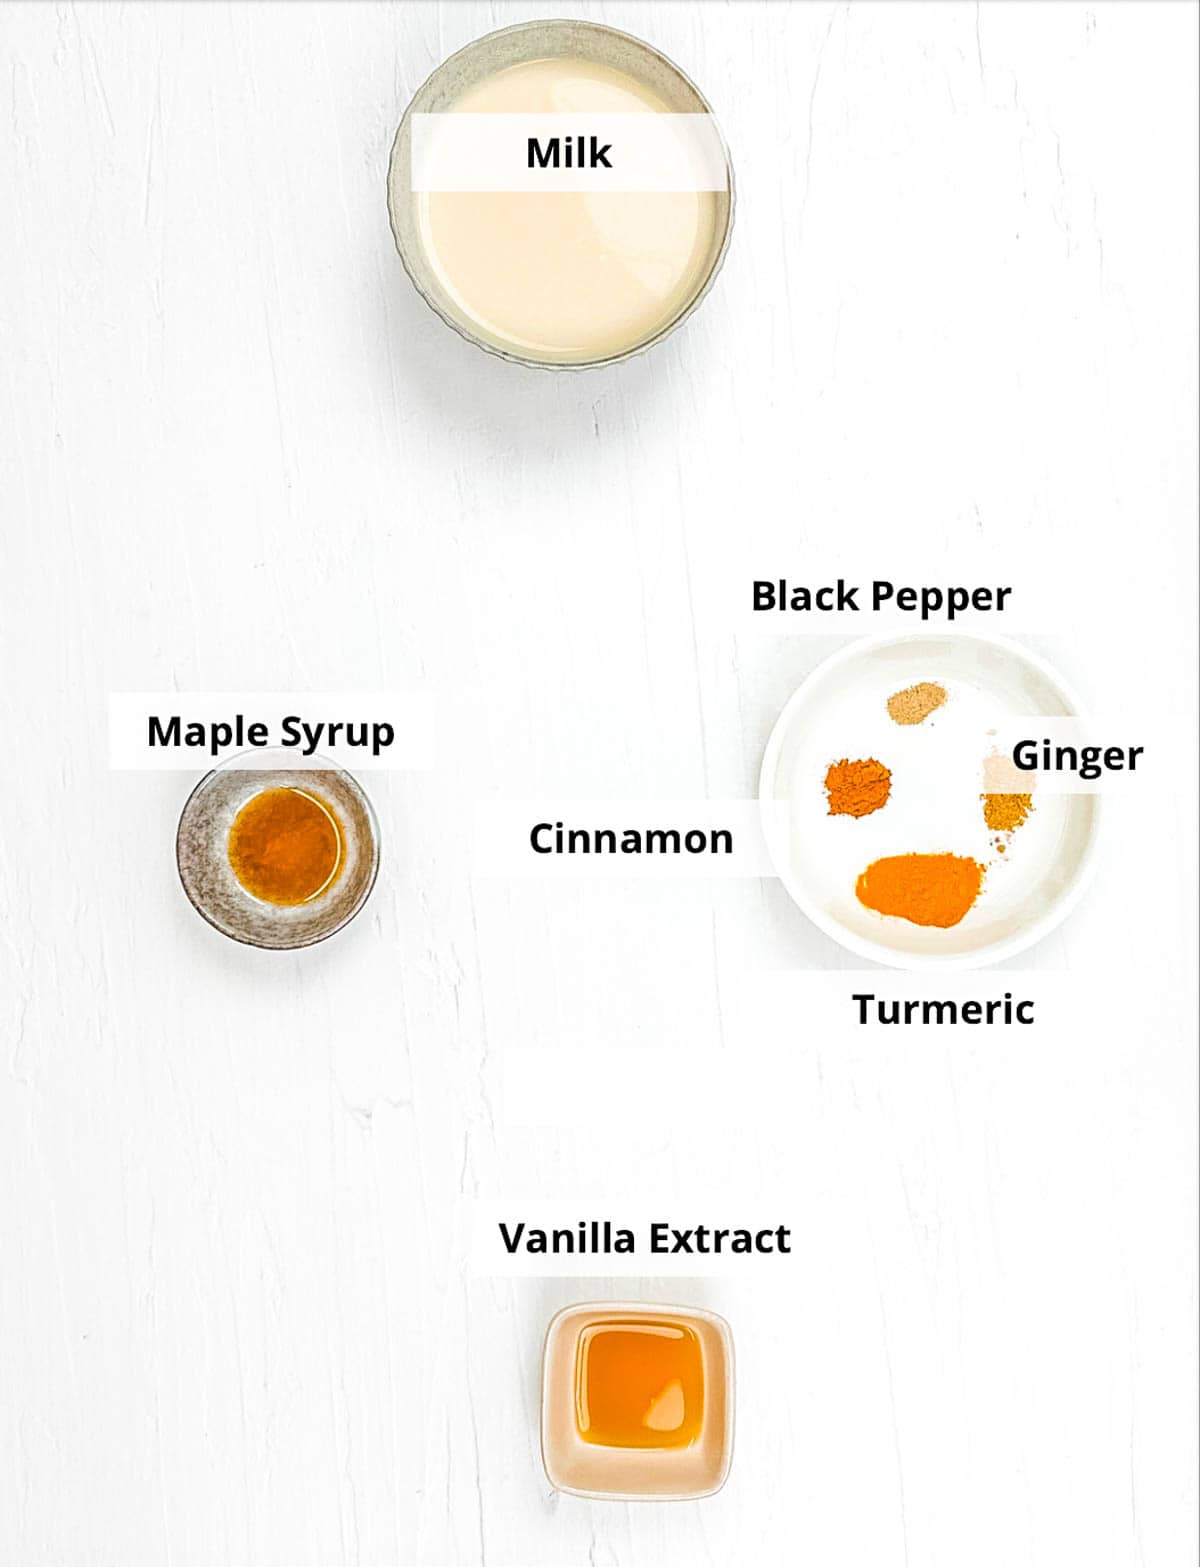 Ingredients for golden milk latte recipe on a white background.